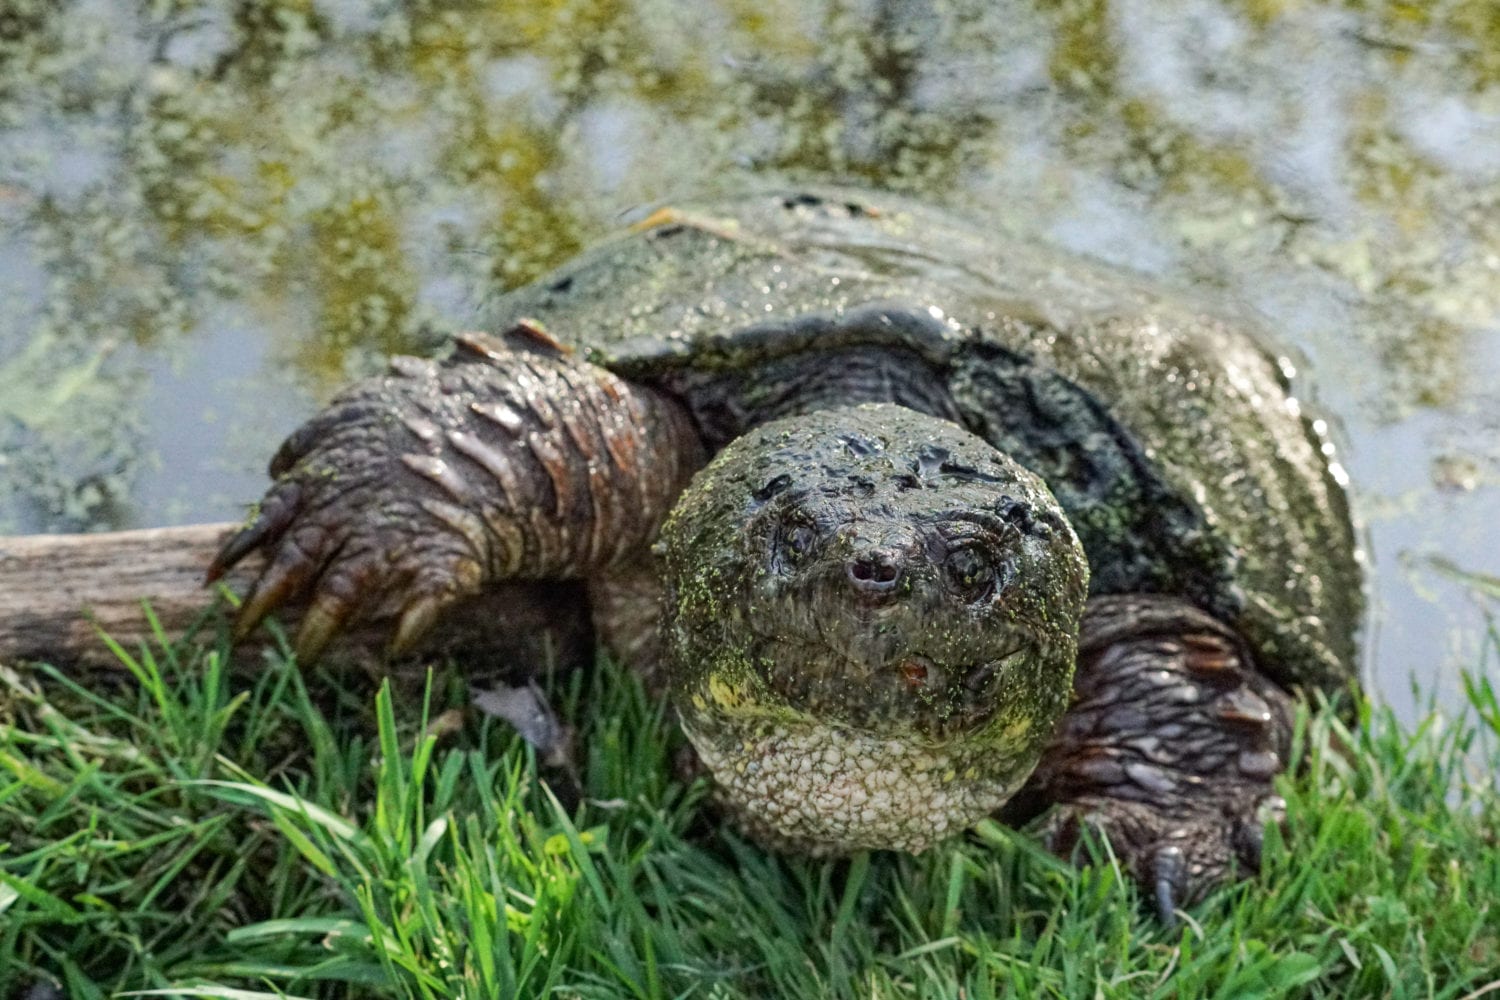 ALAGO-Common Snapping Turtle the Green Monster-03803- | TBR News Media